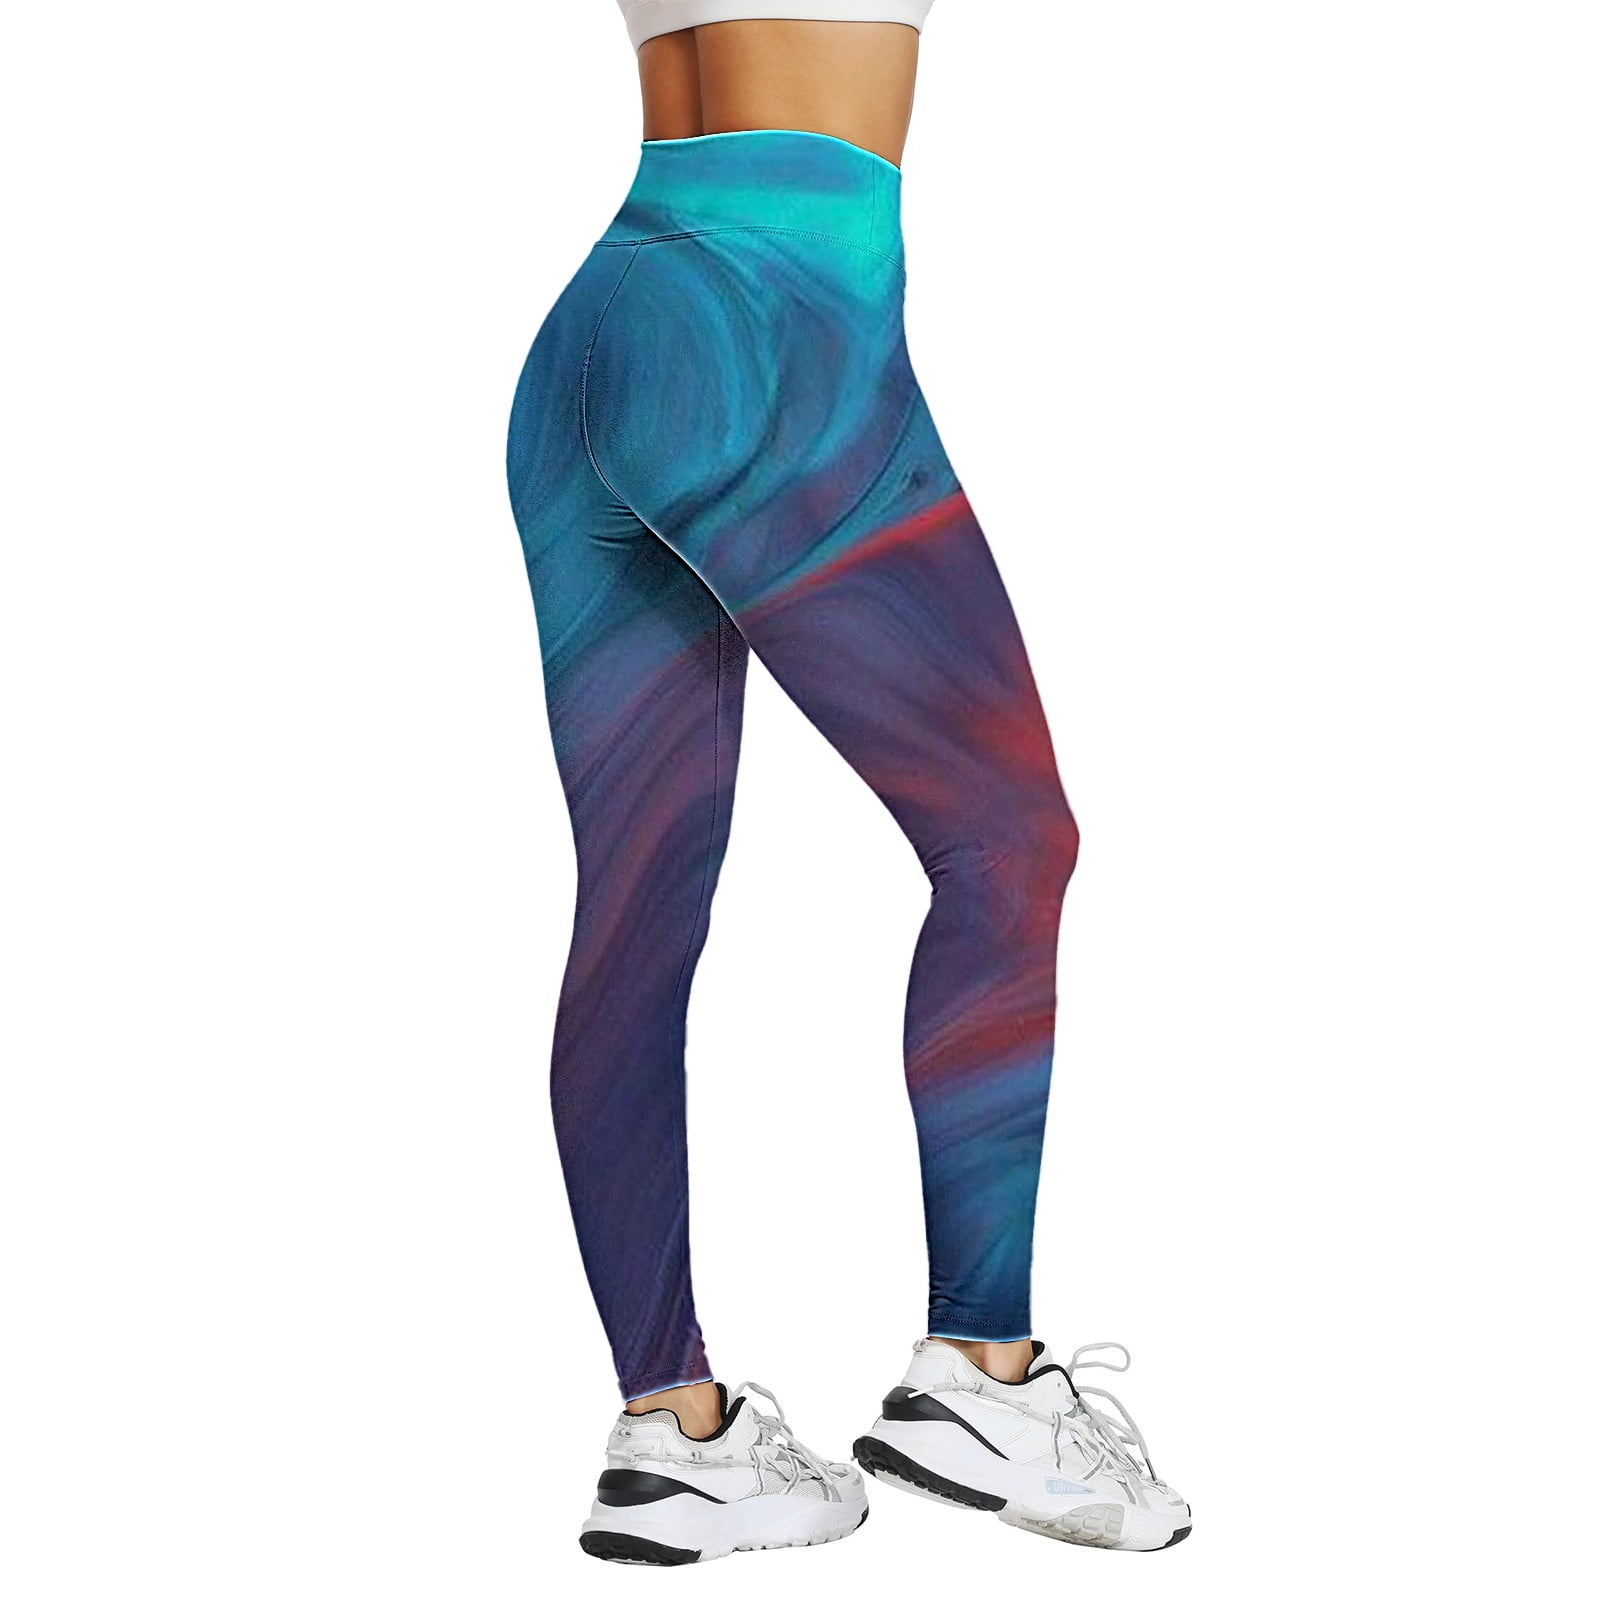 CLZOUD Stretchy Work Pants for Women Black Polyester,Spandex Print High  Waist Pants for Womens Tights Compression Yoga Fitness High Waist Leggings  Xxl